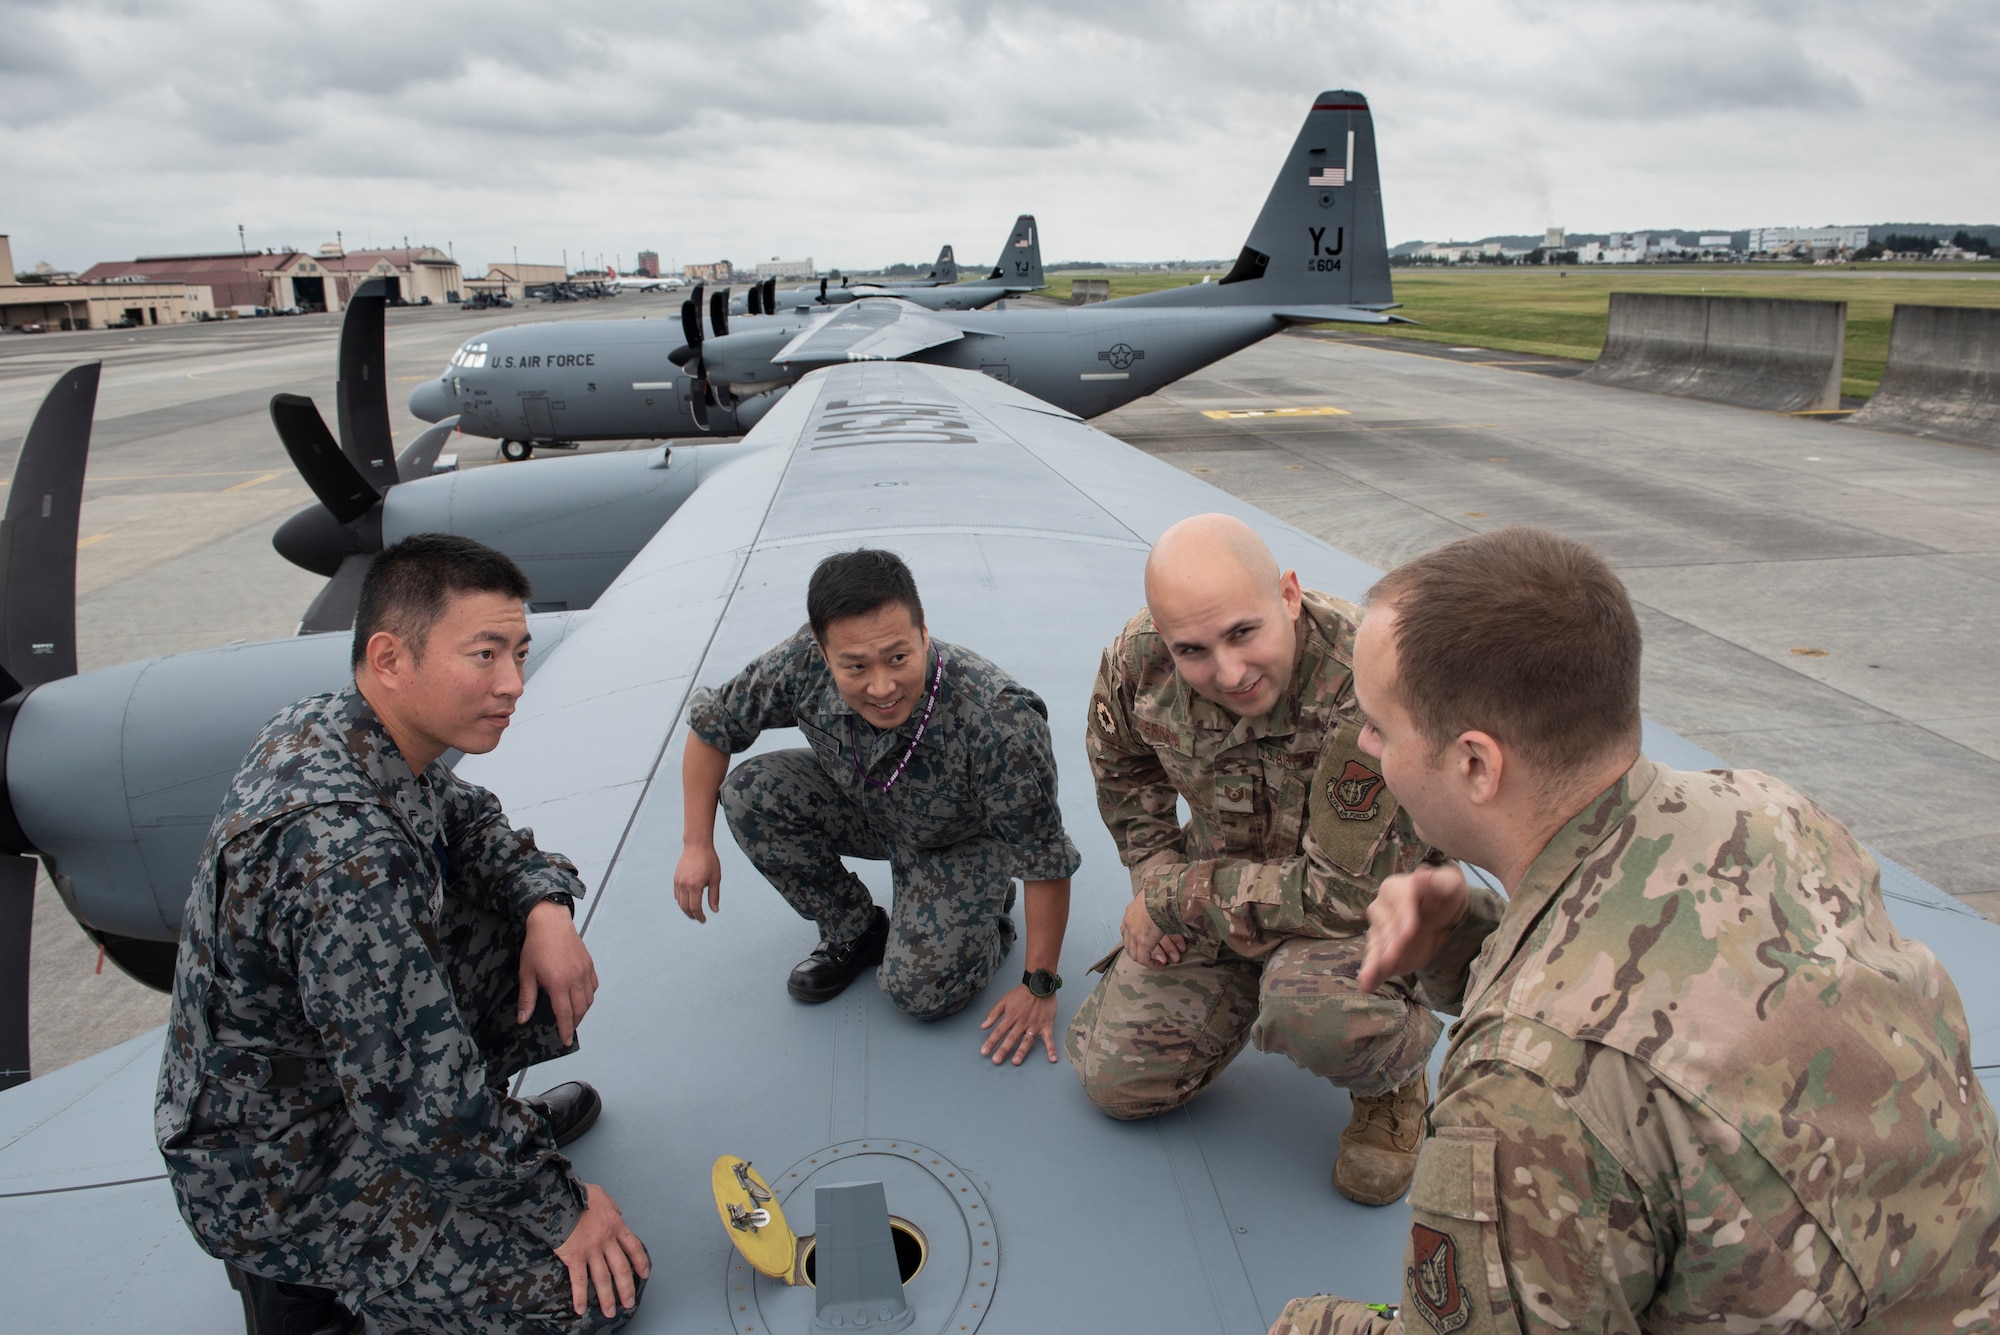 Staff Sgt. Joseph Crinite, 374th Aircraft Maintenance Squadron C-130J Hercules communication and navigation craftsman, shows a dry bay panel on top of a C-130J Super Hercules to members from the Japan Air Self-Defense Force during a Bilateral Exchange Program, Oct. 24, 2019, at Yokota Air Base, Japan.